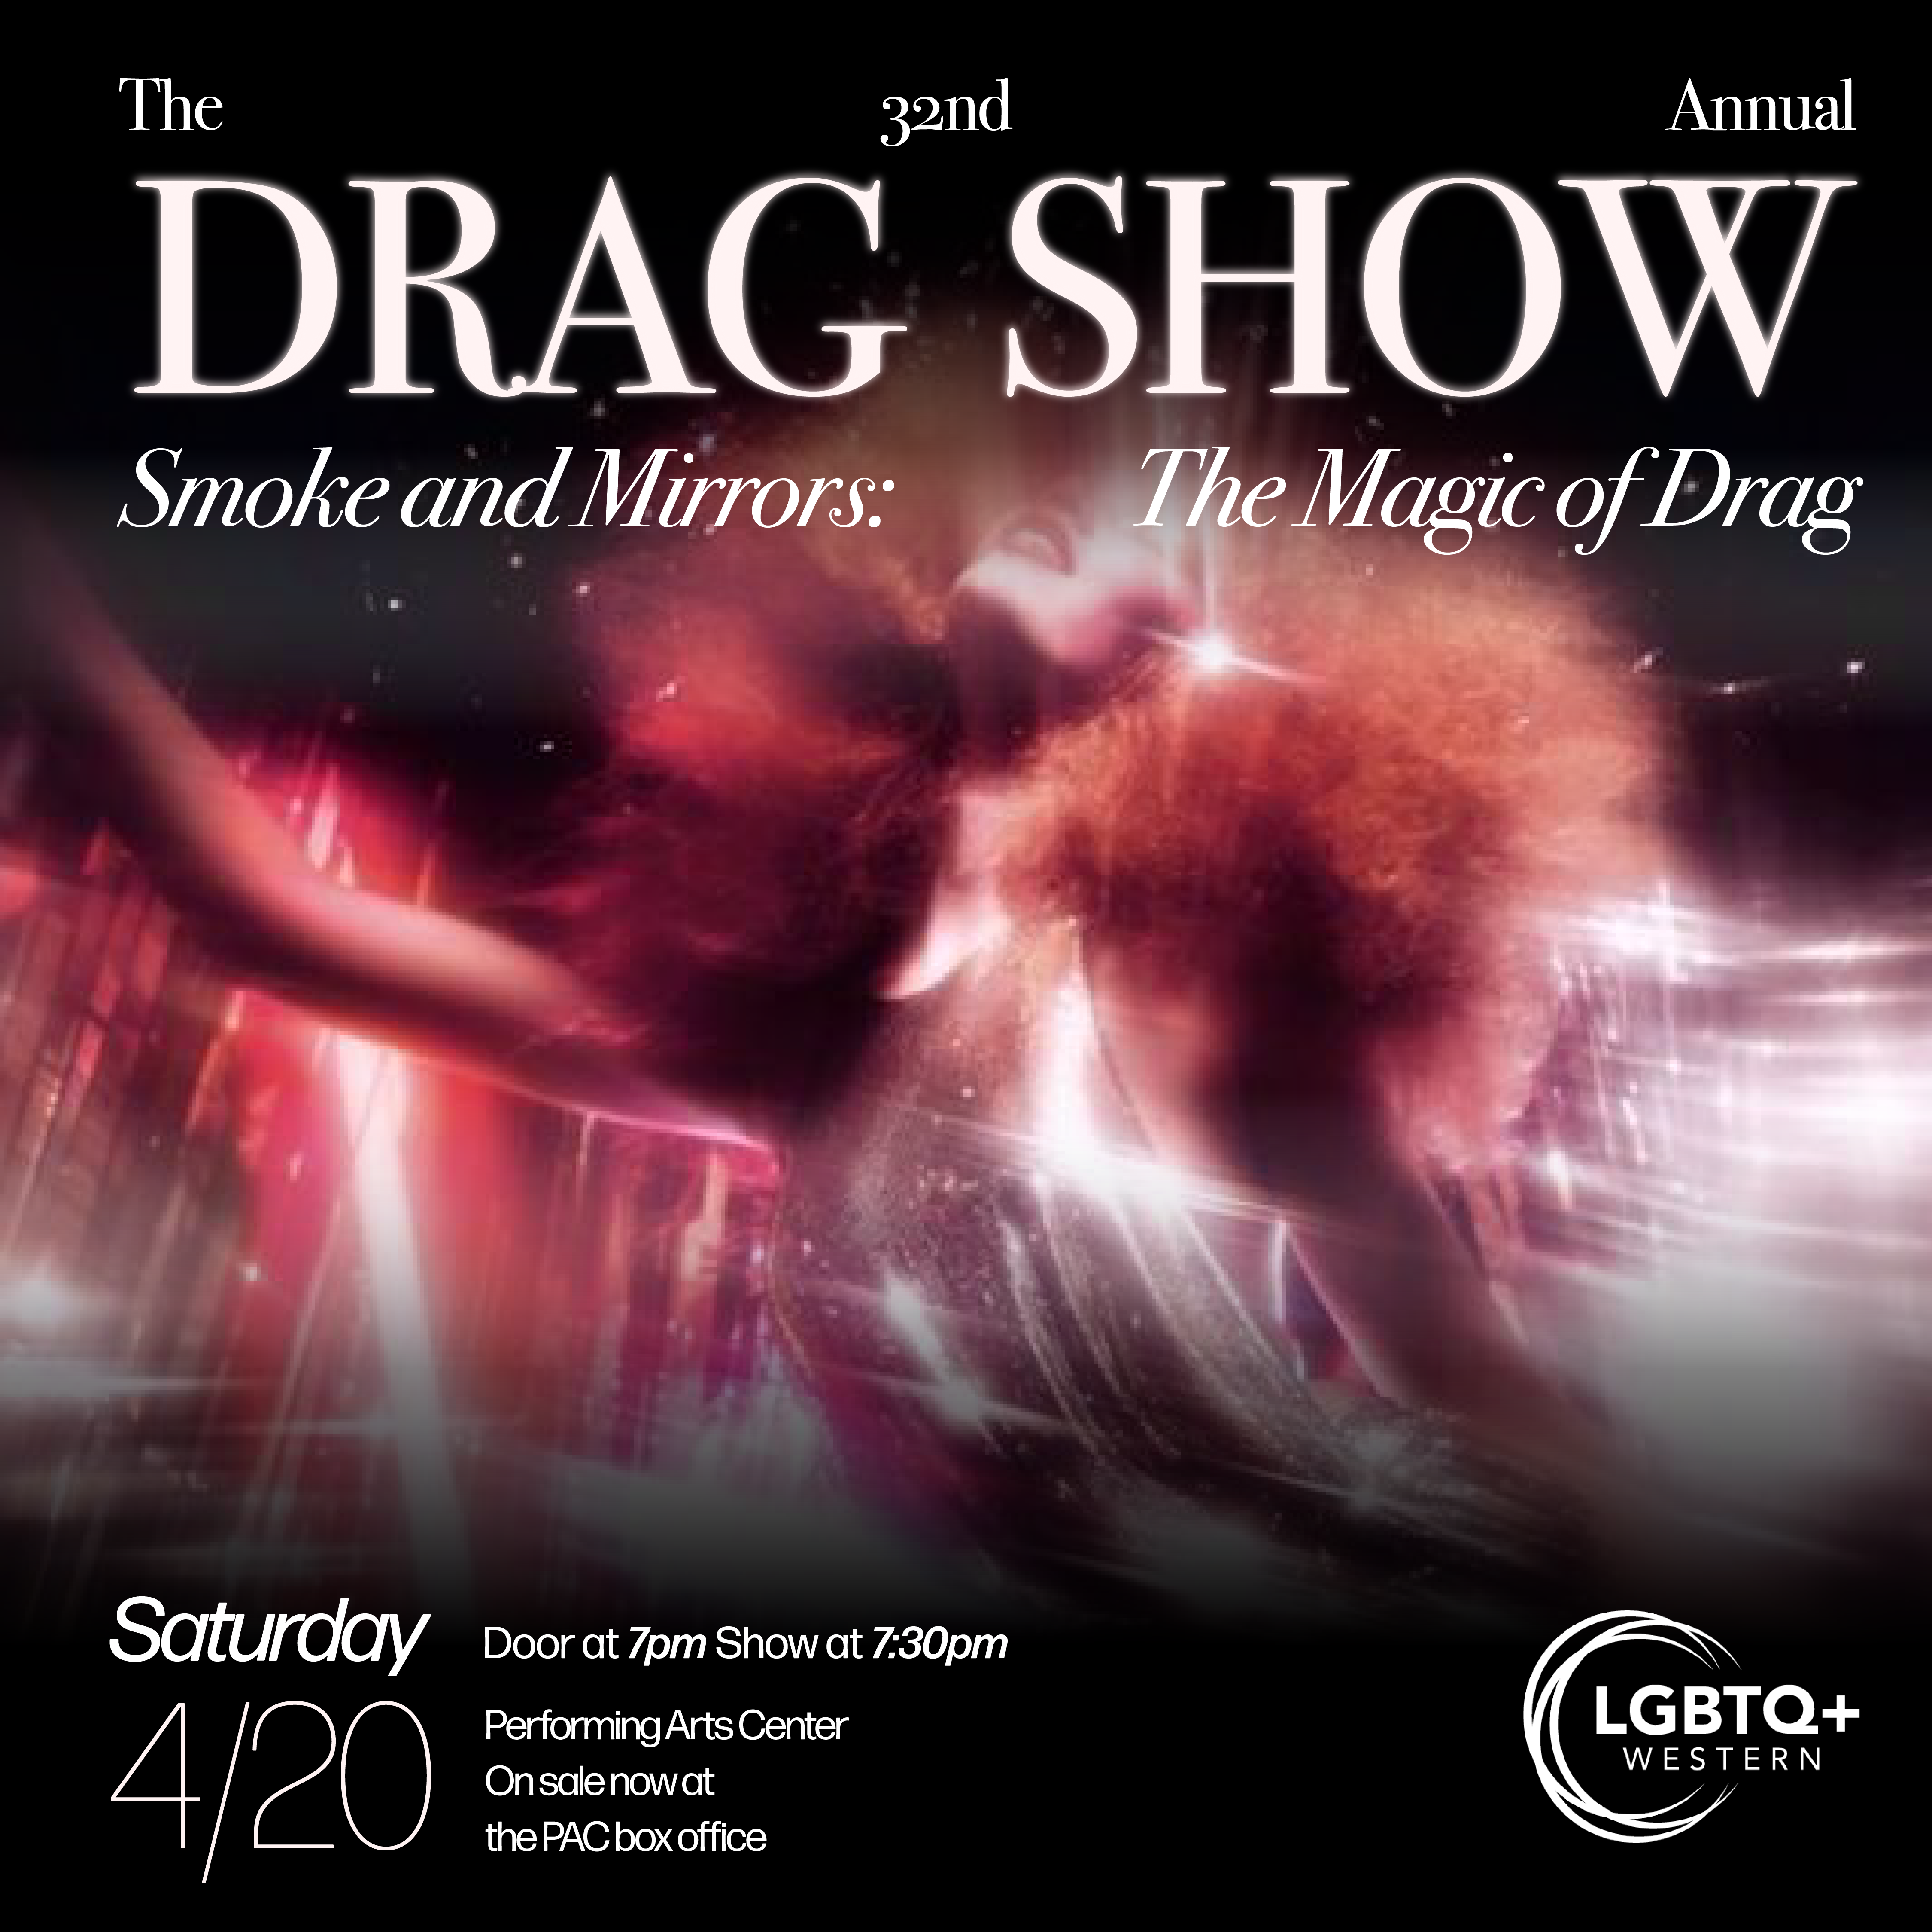 On a black background there is a hazy image of a person in a gold sparkly top with big, textured, and teased red hair surrounded by red and pink hazy lights with one arm raised and face looking towards the sky. Across the top in white bold text reads “The 32nd Annual Drag Show Smoke and Mirrors: The Magic of Drag.” Across the bottom in white bold text reads “Saturday, 4/20. Door at 7pm, show at 7:30pm. Performing Arts Center Concert Hall. Tickets are on sale now at the PAC ticket office.]